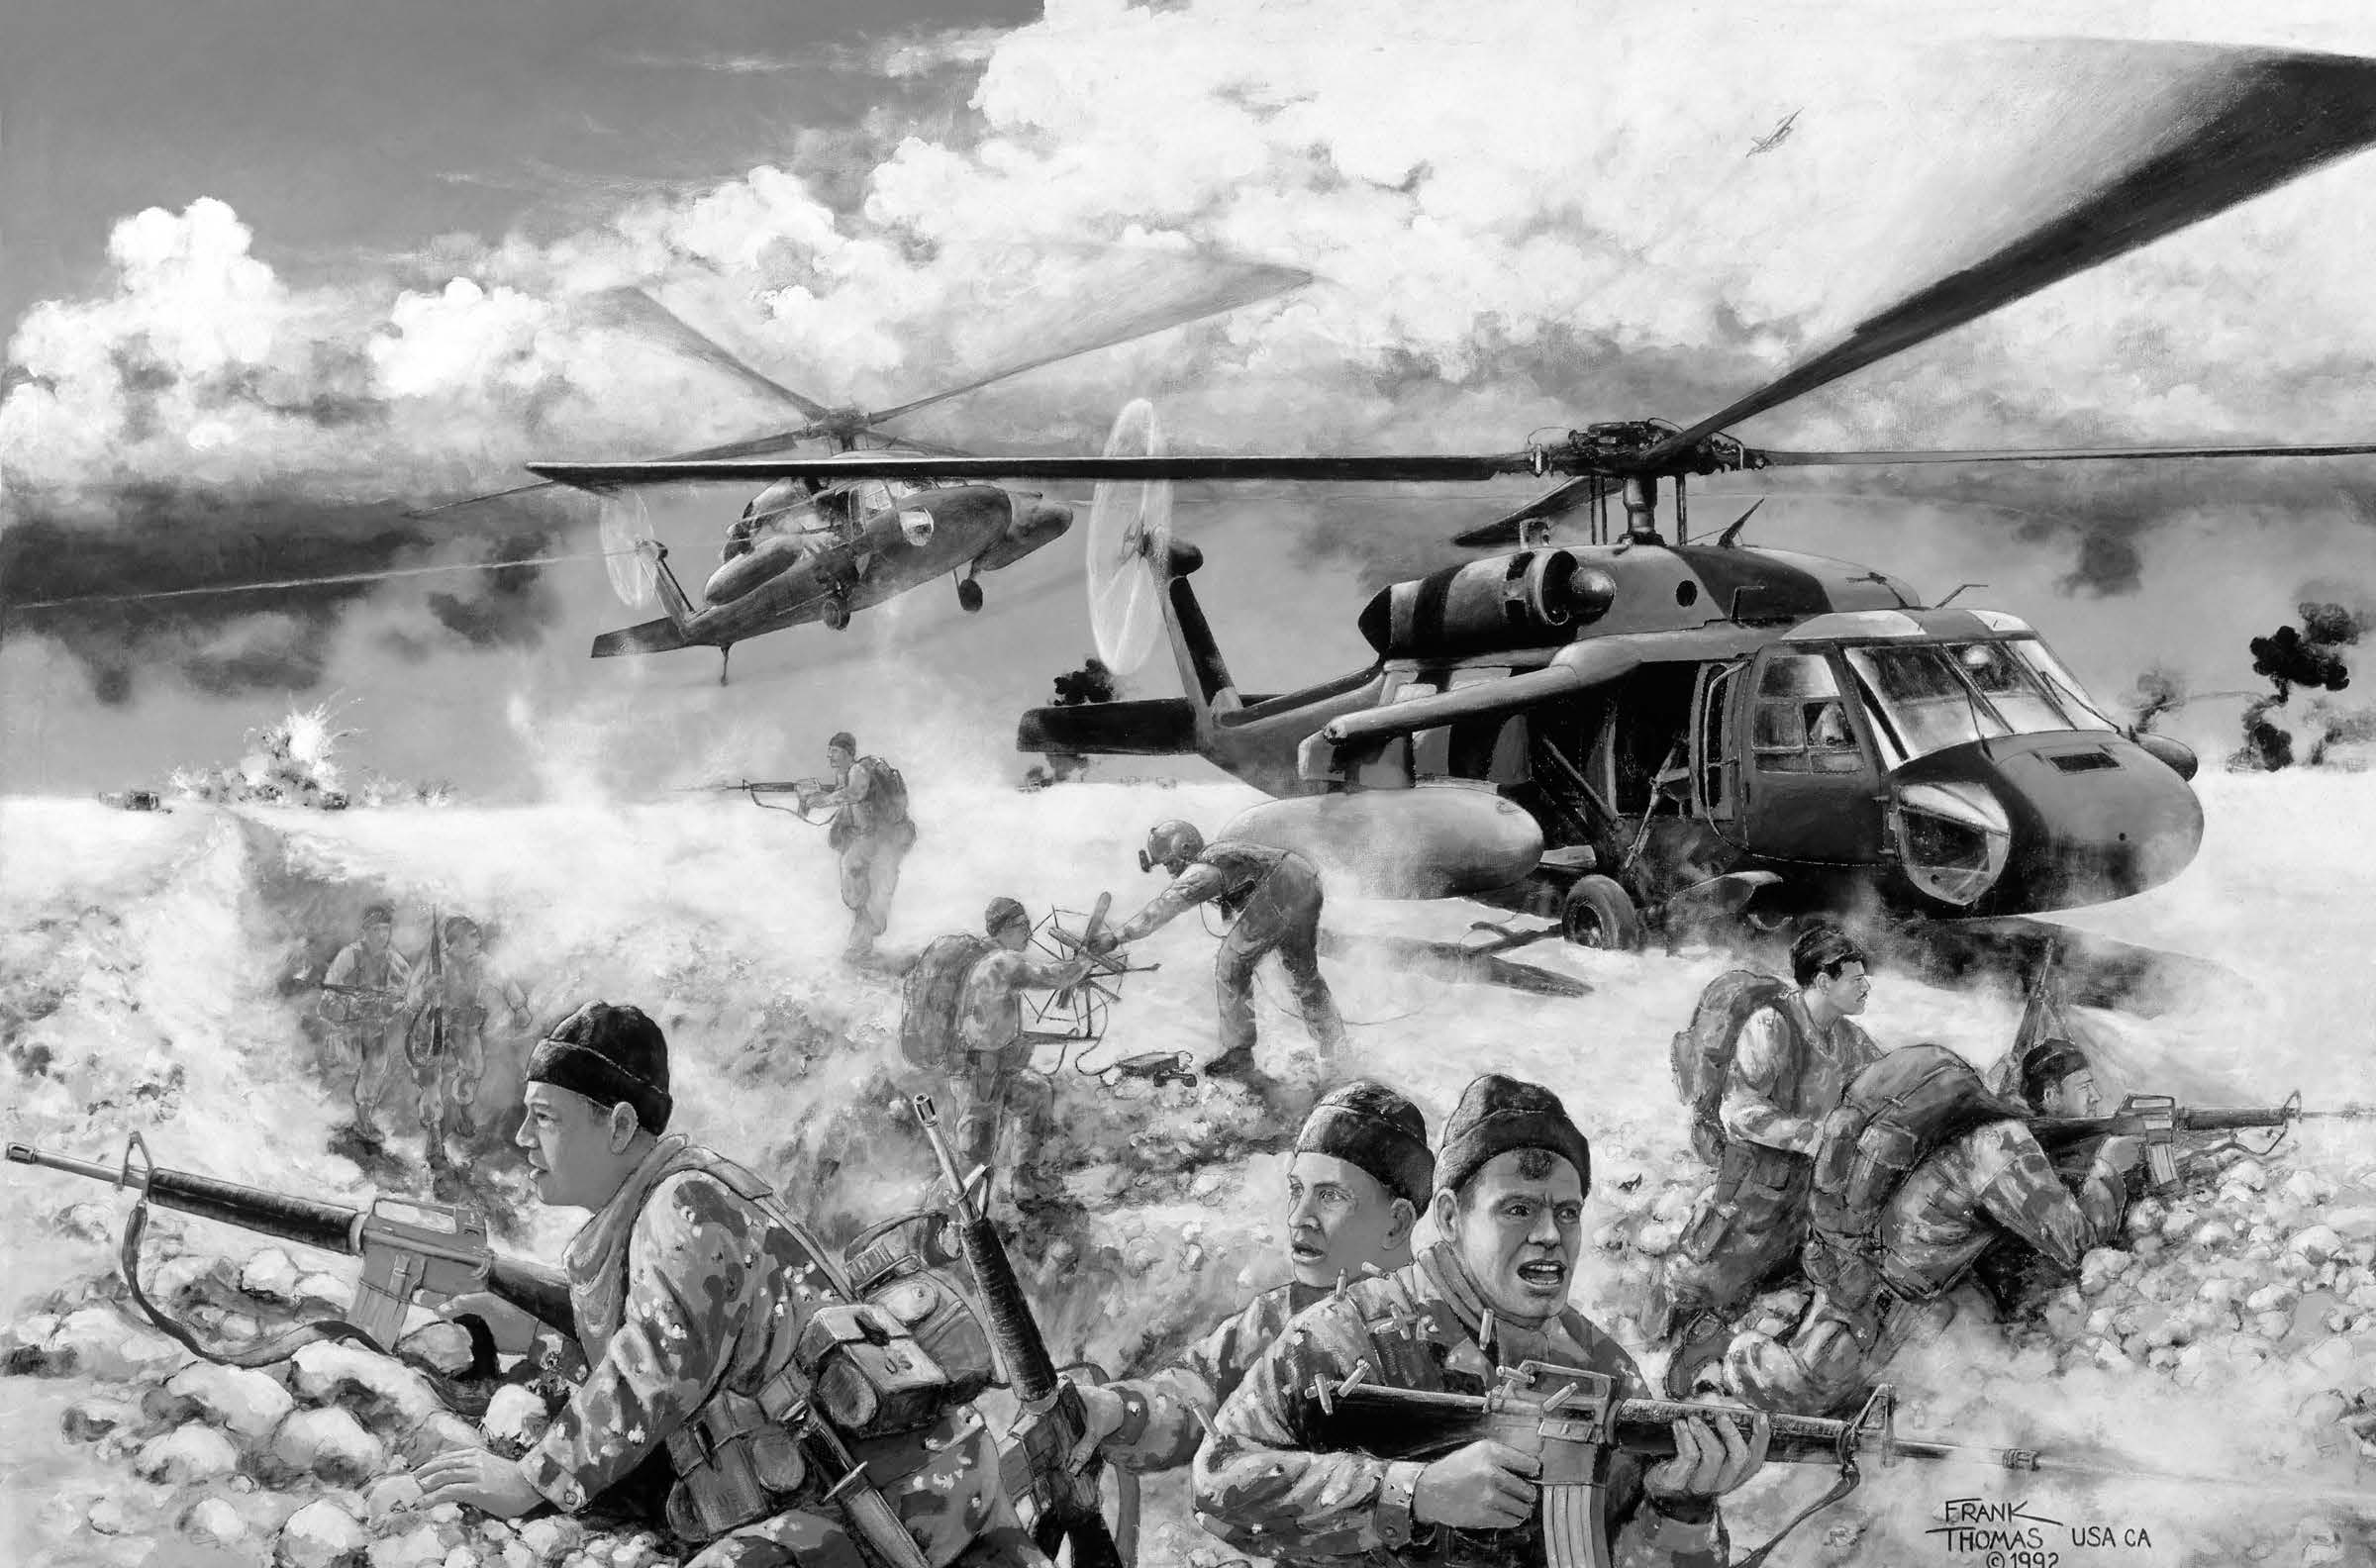 Desperate Extraction: North of the Euphrates, Two Days Before the War by U.S. Army combat artist Frank M. Thomas. This nine-man Special Forces team is shown being extracted after their commando operation went awry in Iraq. Courtesy of the artist.